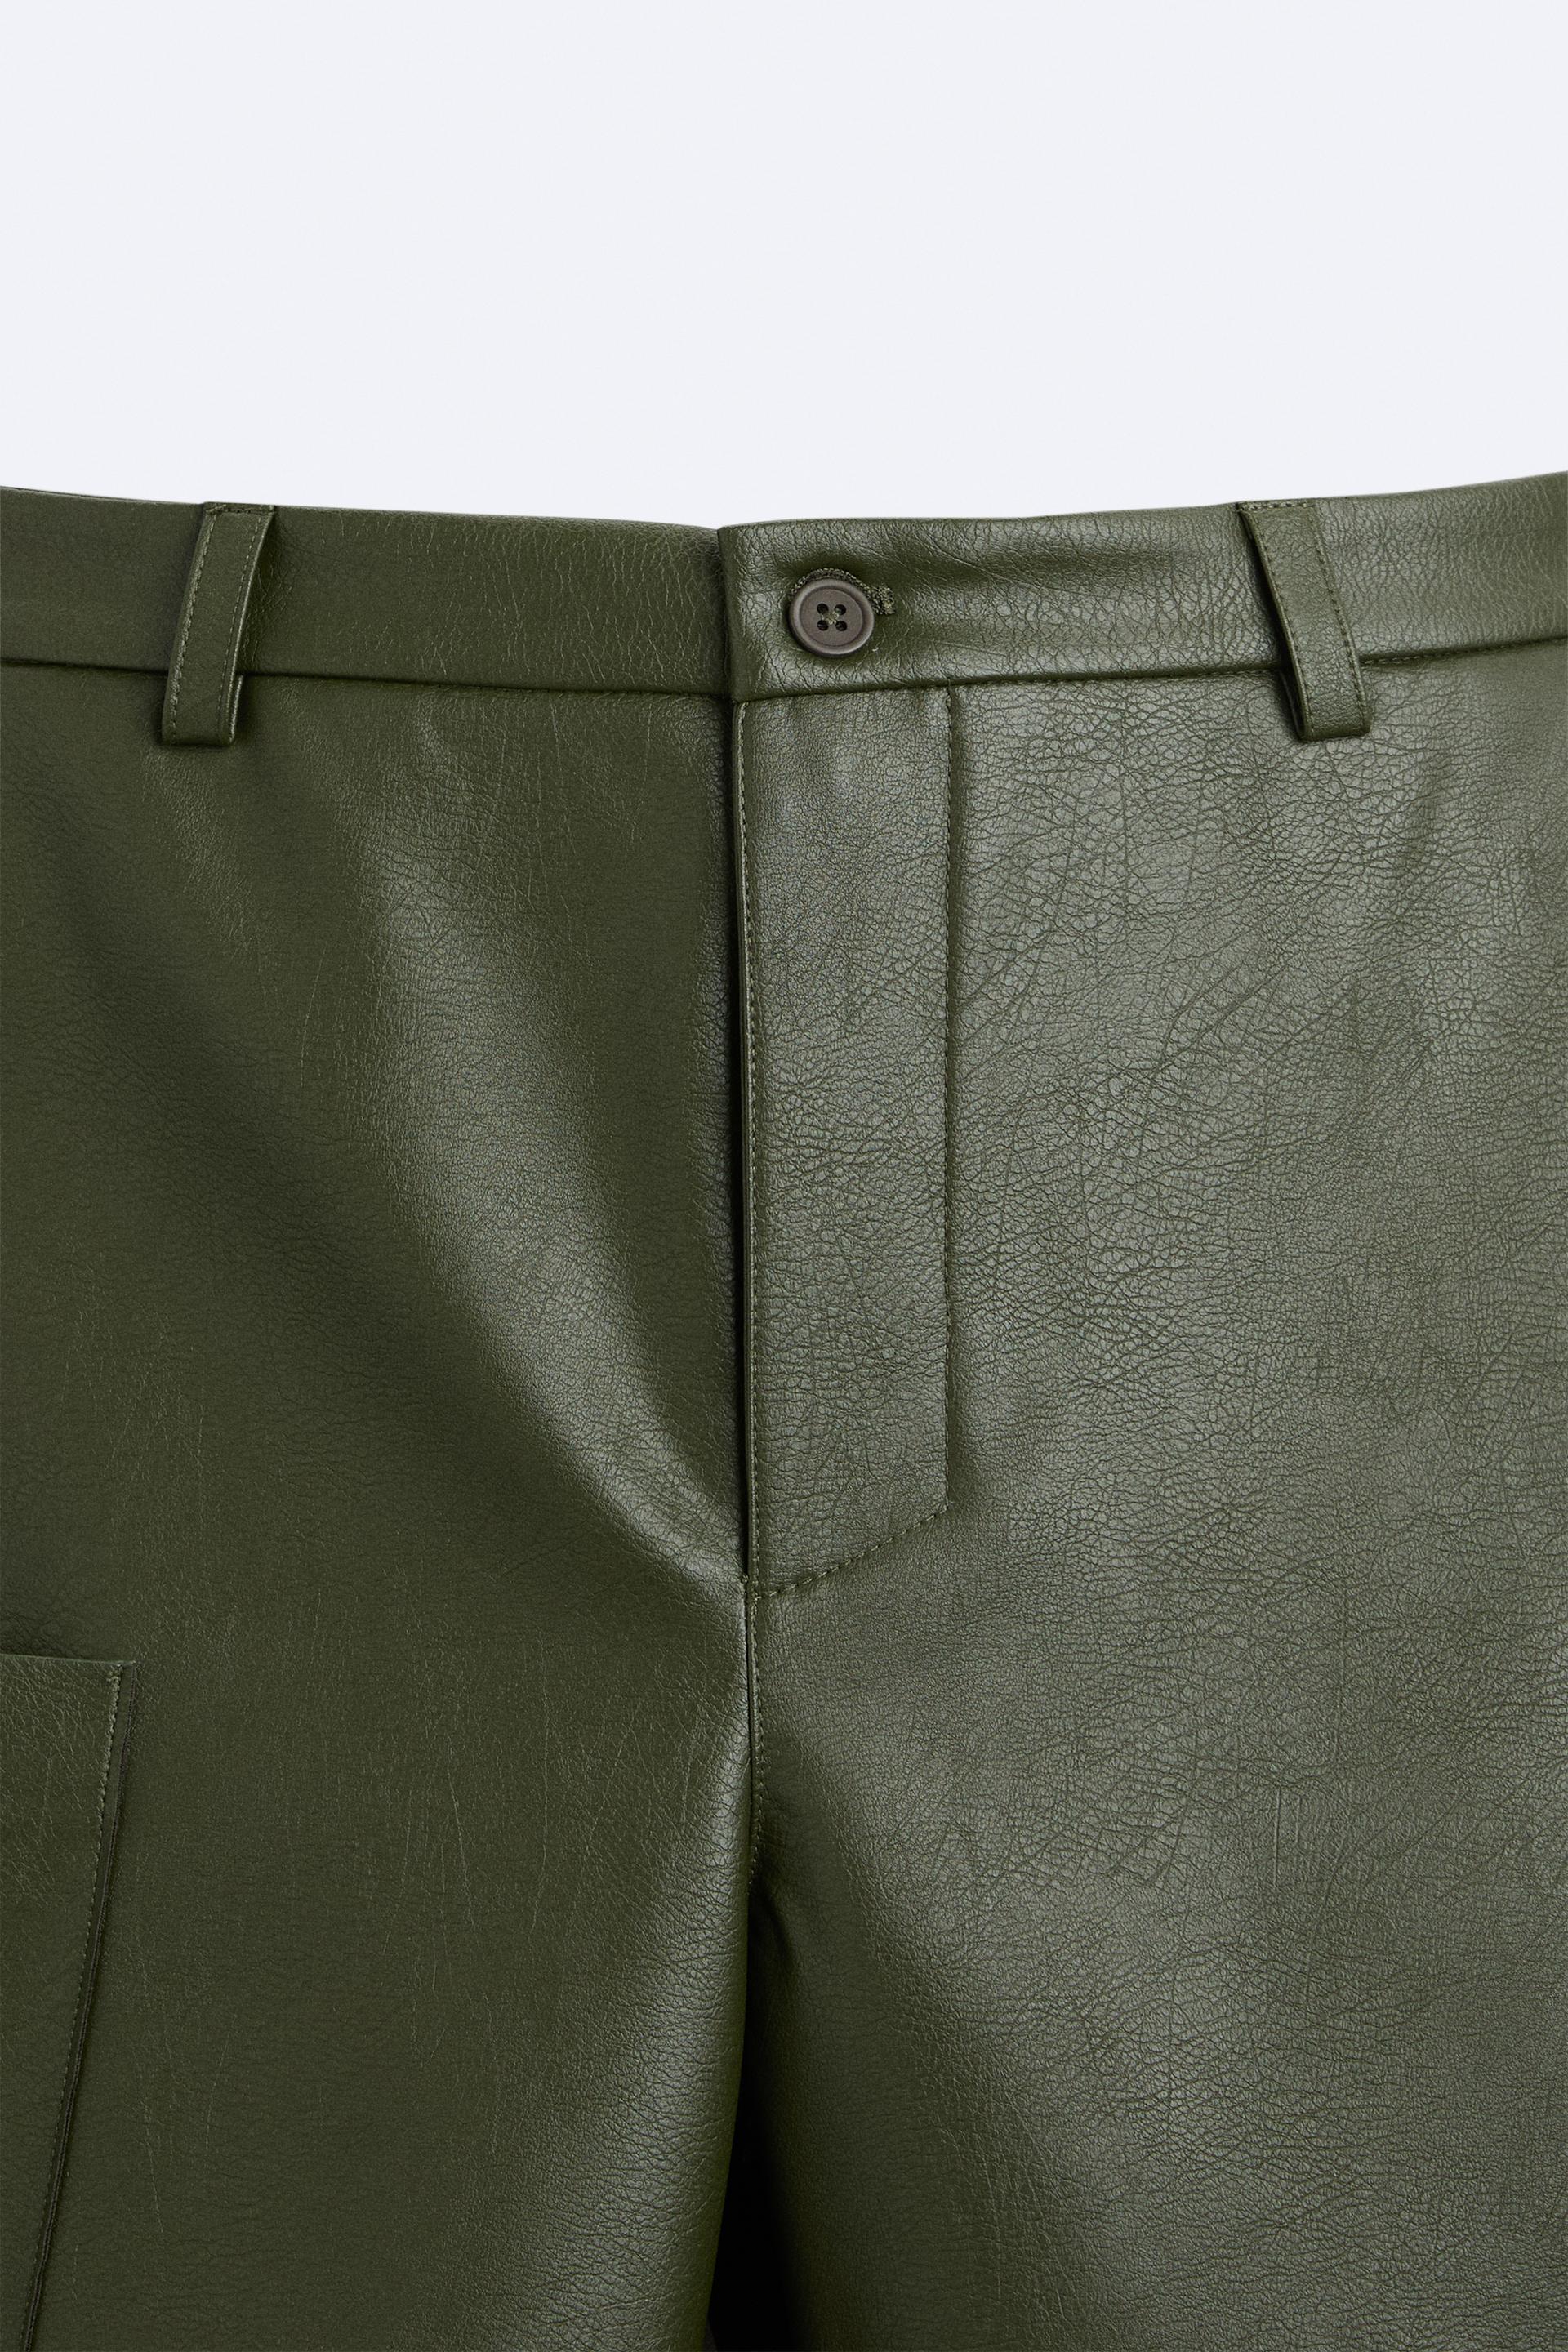 ZARA NEW WOMAN Solid COLOURED FAUX LEATHER TROUSERS PANT GREEN